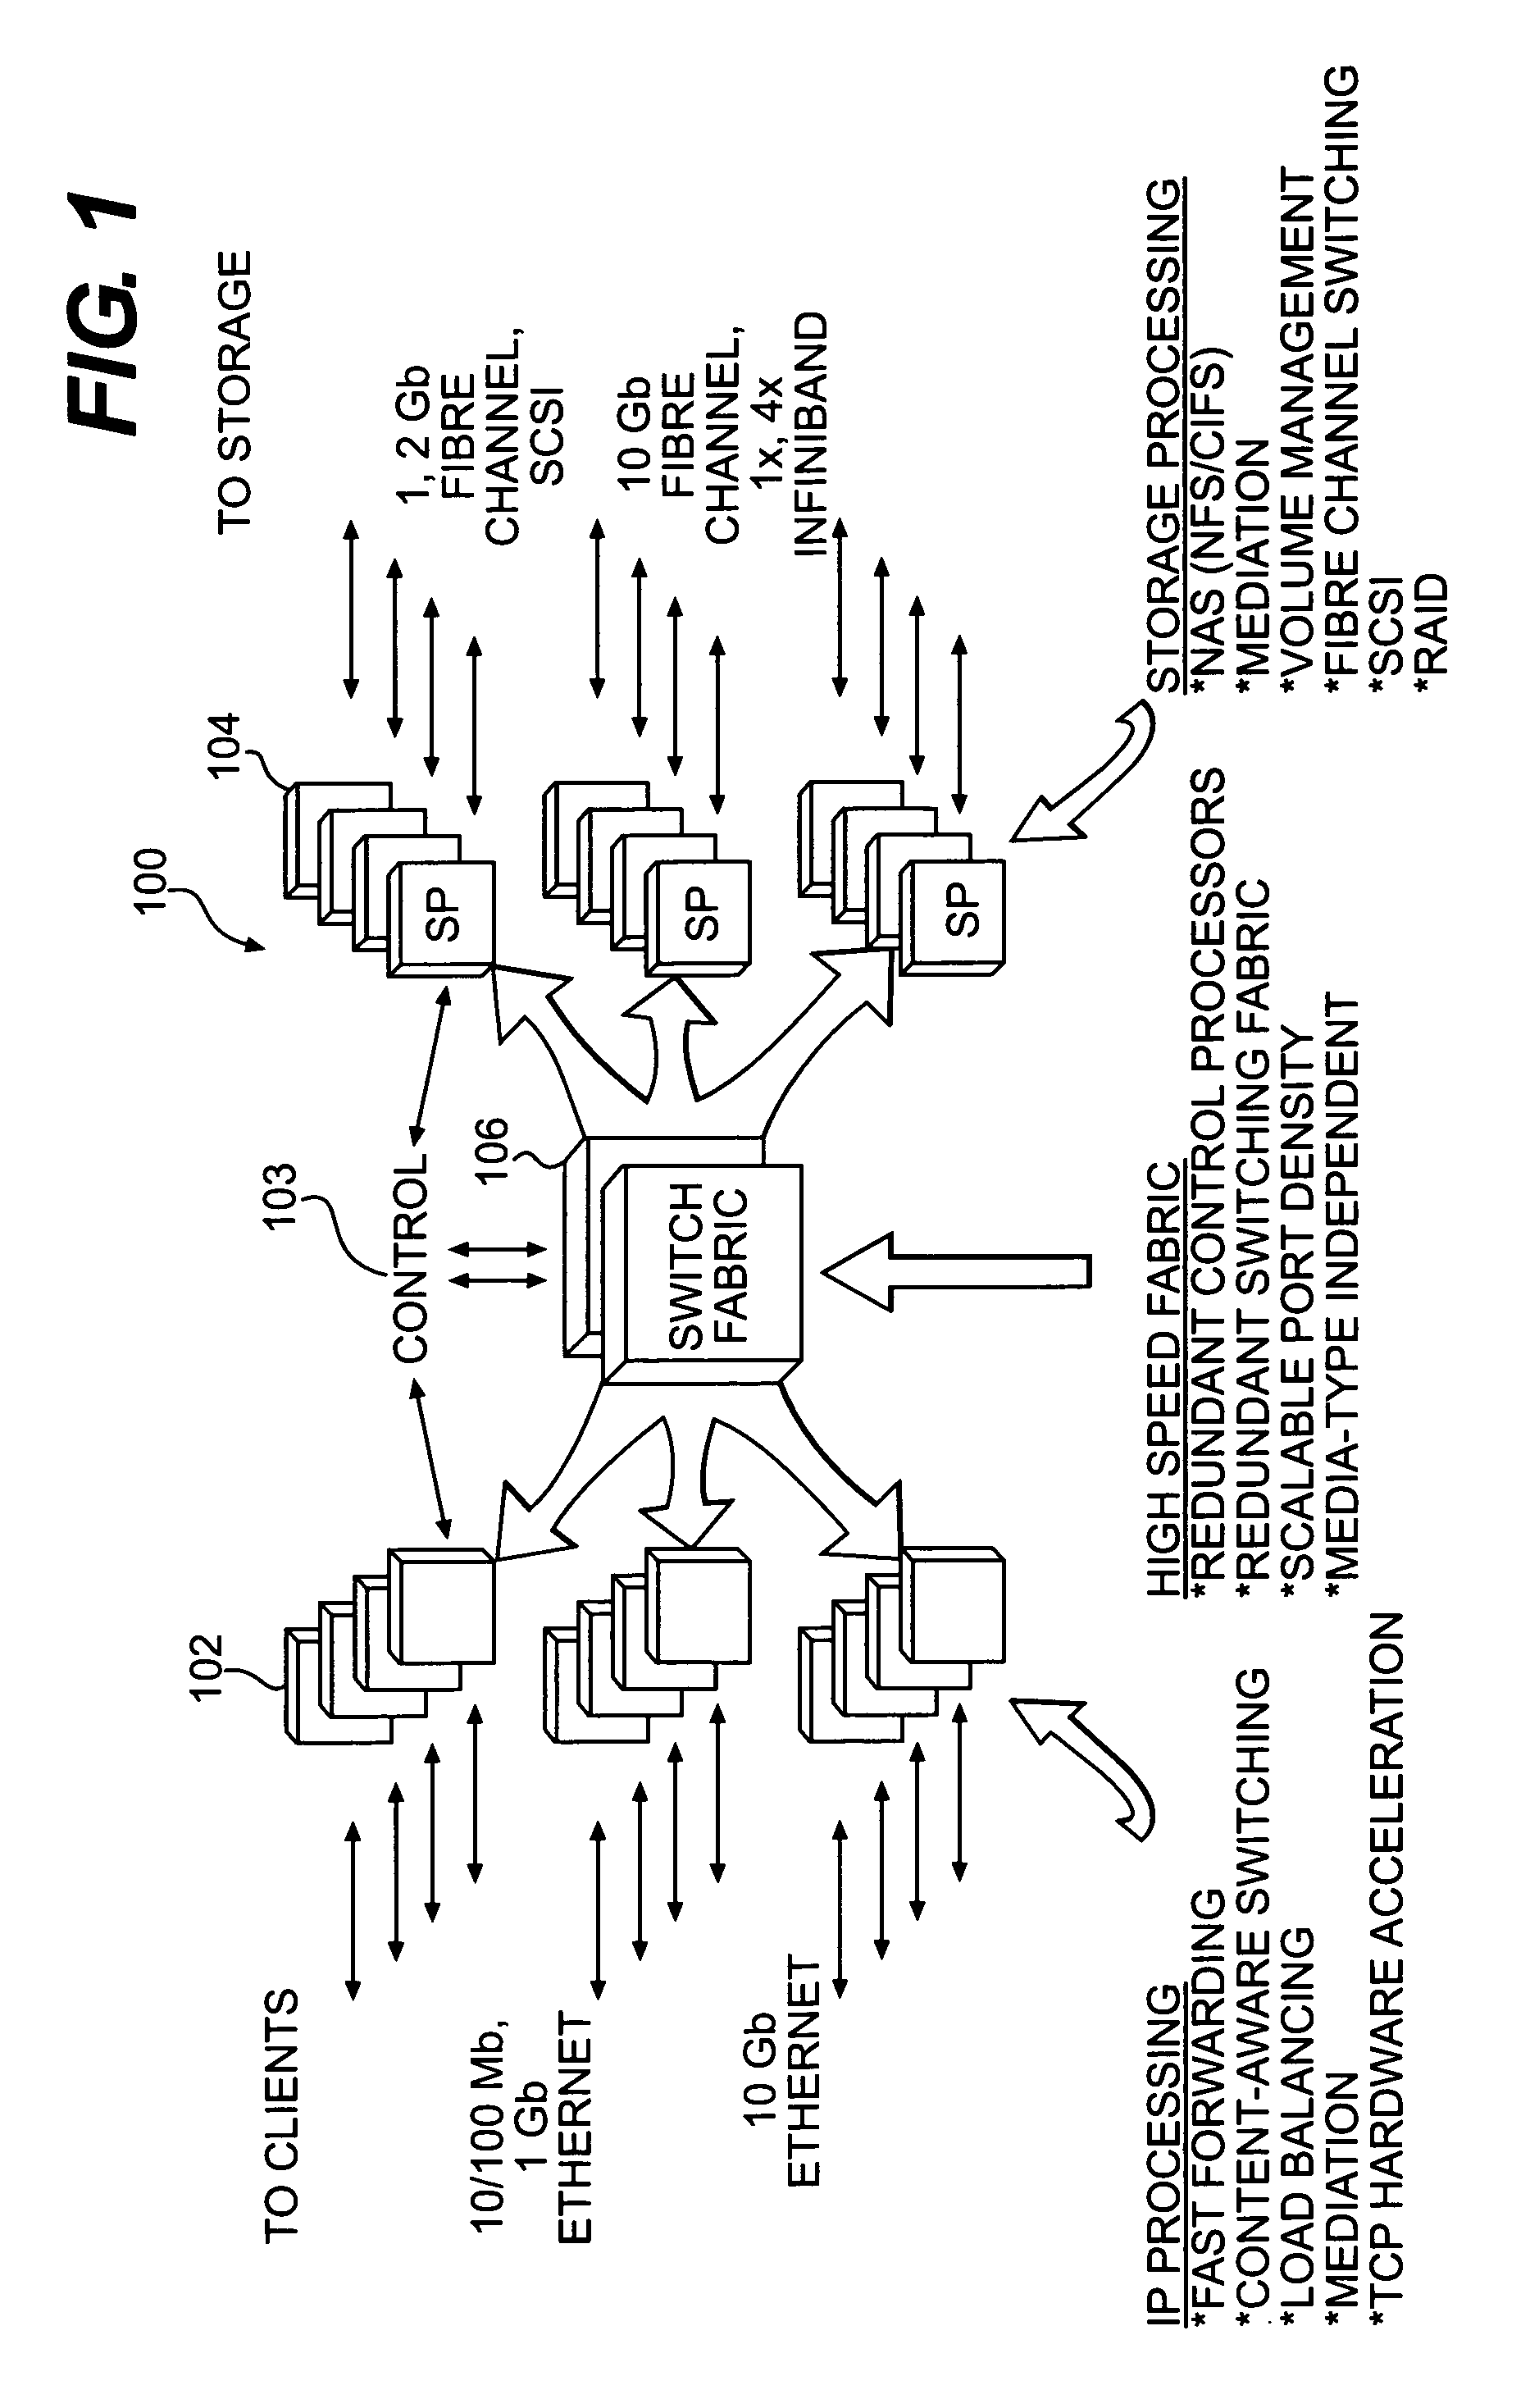 Switching system method for discovering and accessing SCSI devices in response to query